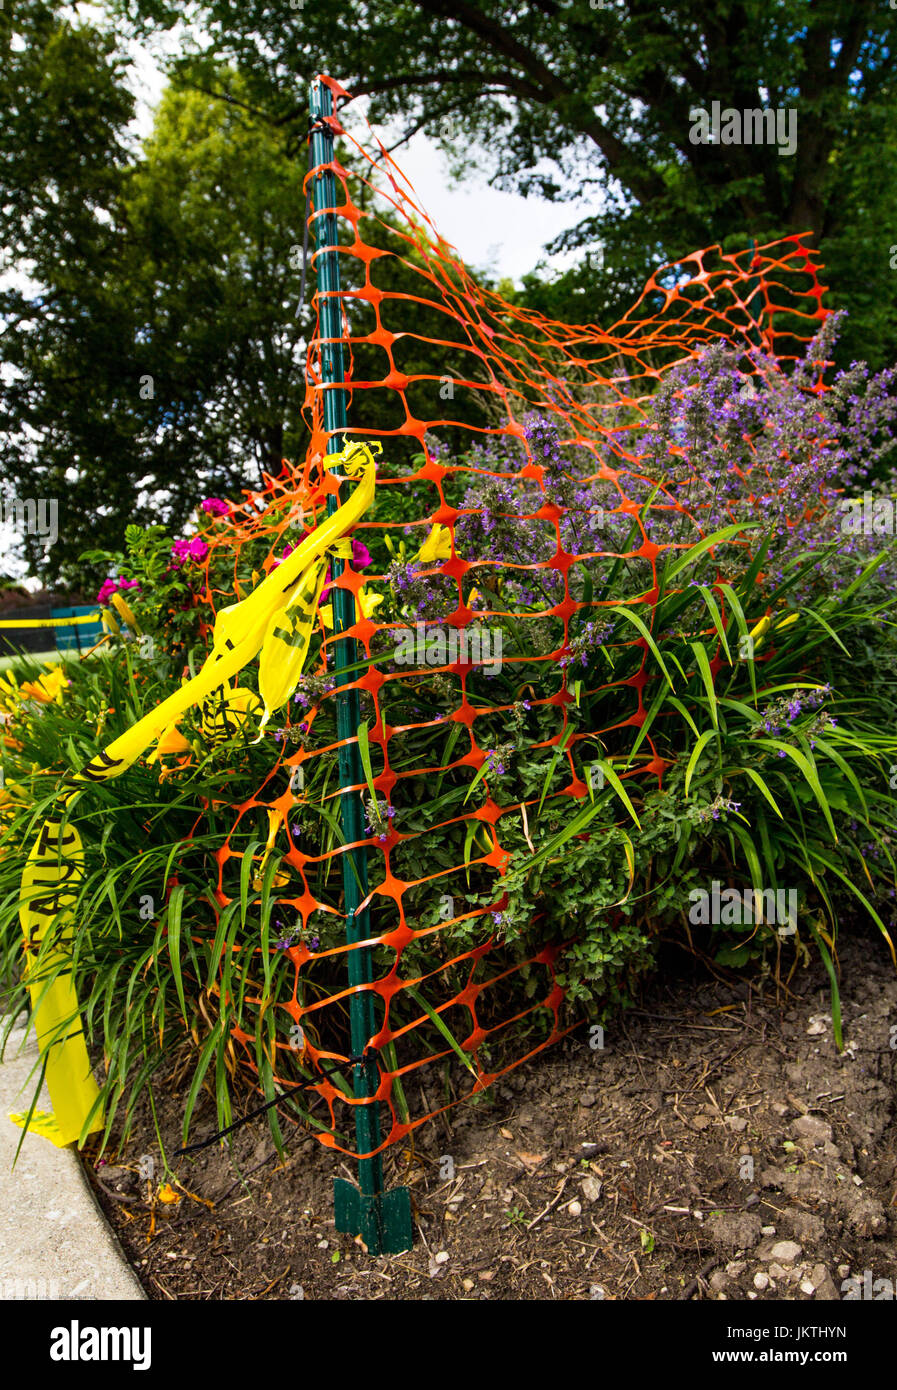 Flowers that were bound by orange caution tape to make an abstract colorful scene. Stock Photo